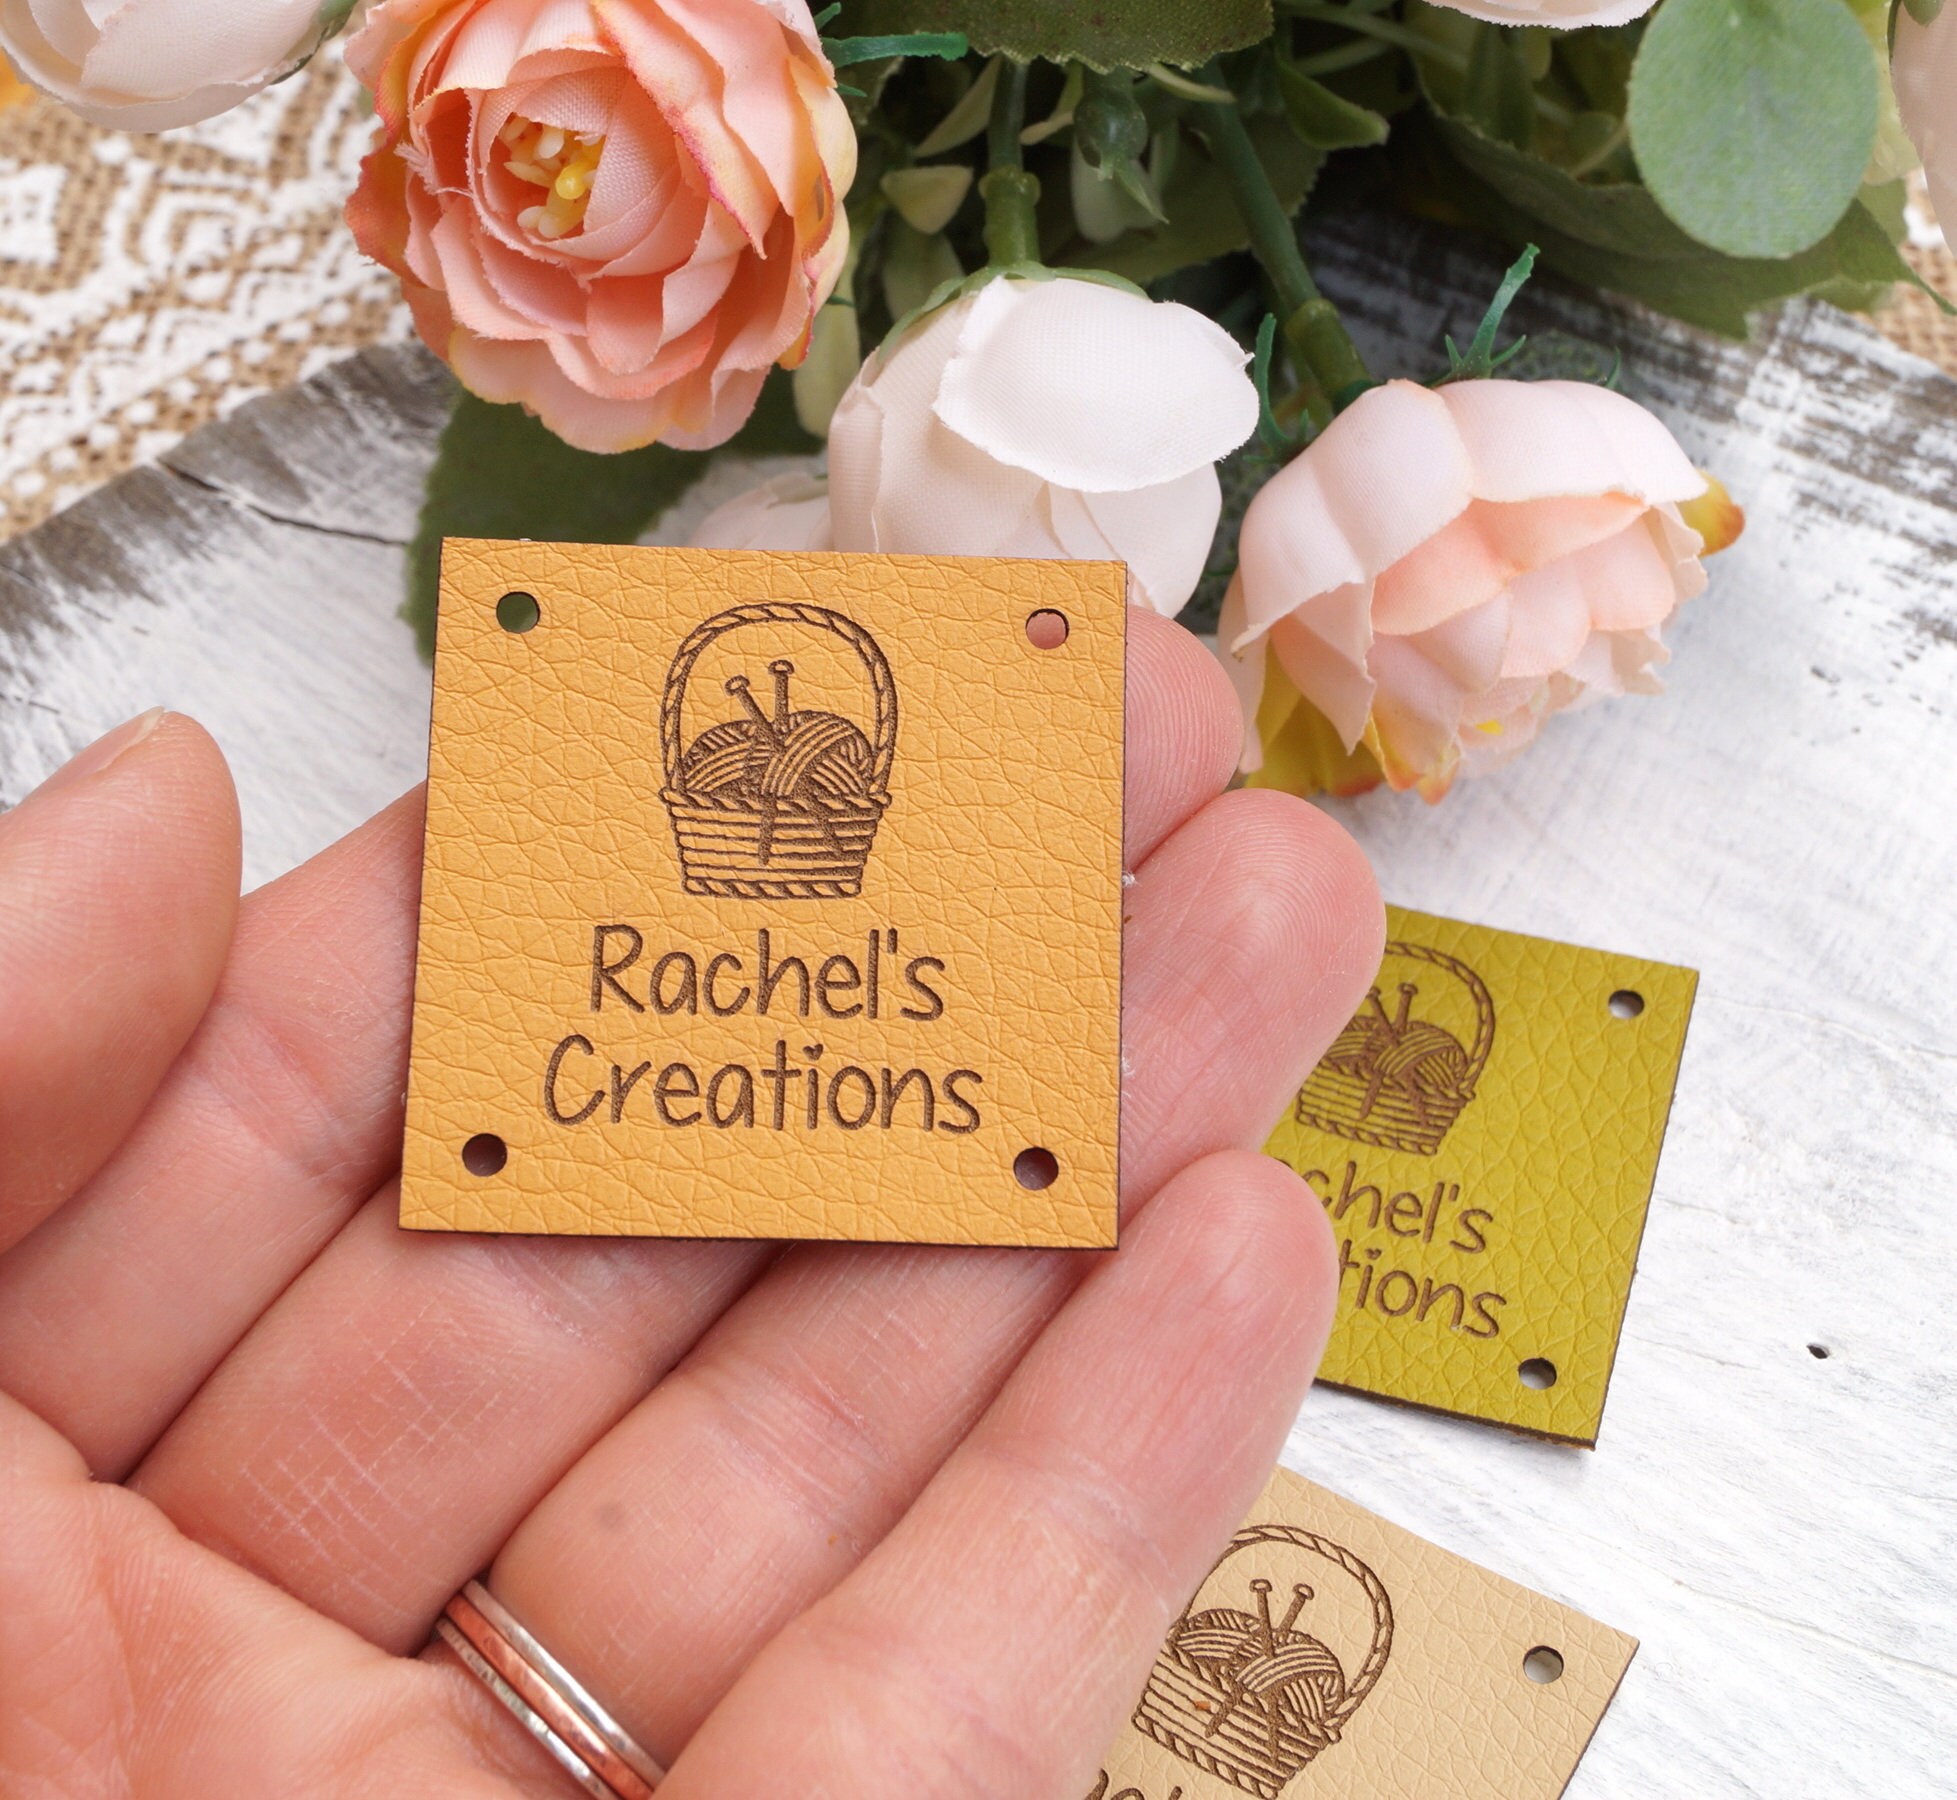 Acrylic tags for handmade items - personalized labels for knitting,  crochet, sewing, accessories, swimwear - custom clothing labels - 25 pc